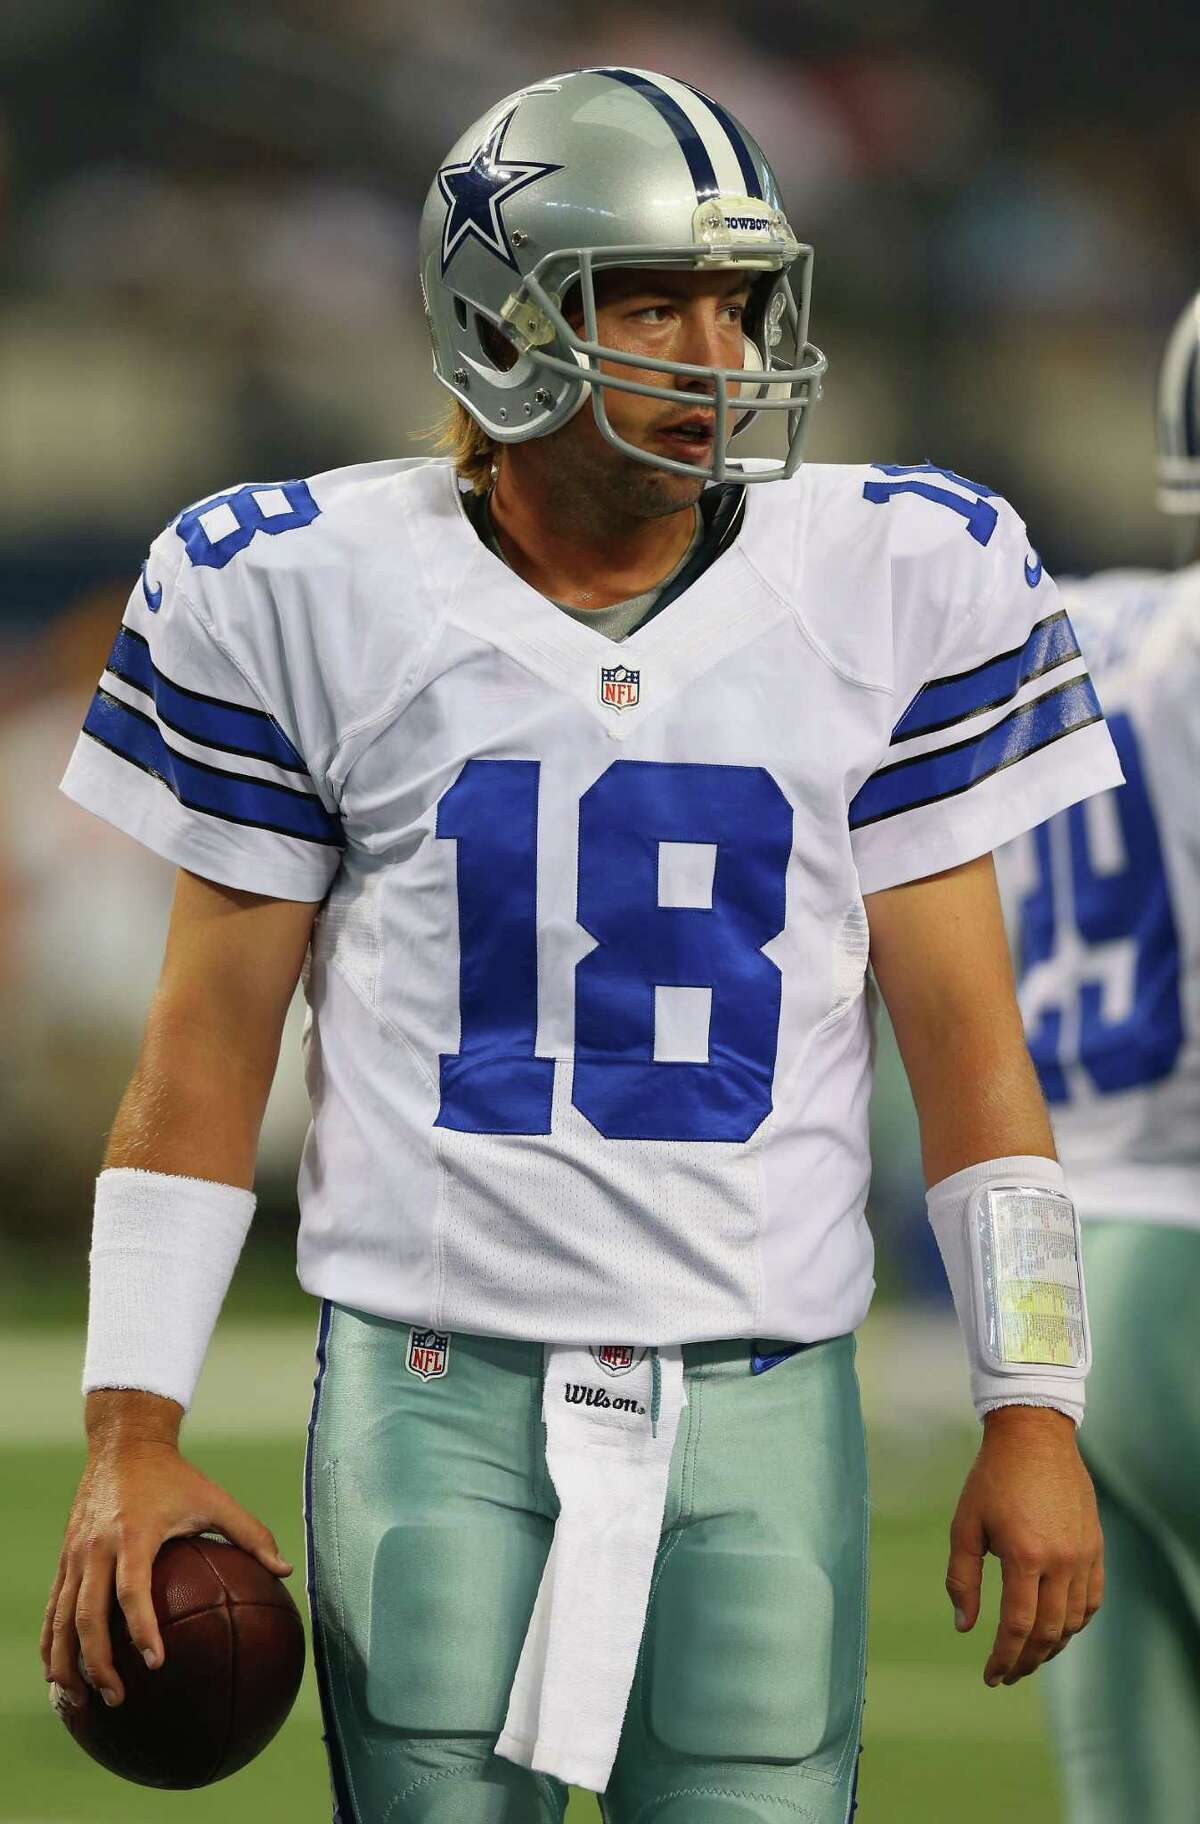 ARLINGTON, TX - AUGUST 24: Kyle Orton #18 of the Dallas Cowboys during a preseason game at AT&T Stadium on August 24, 2013 in Arlington, Texas. (Photo by Ronald Martinez/Getty Images) *** Local Caption *** Kyle Orton